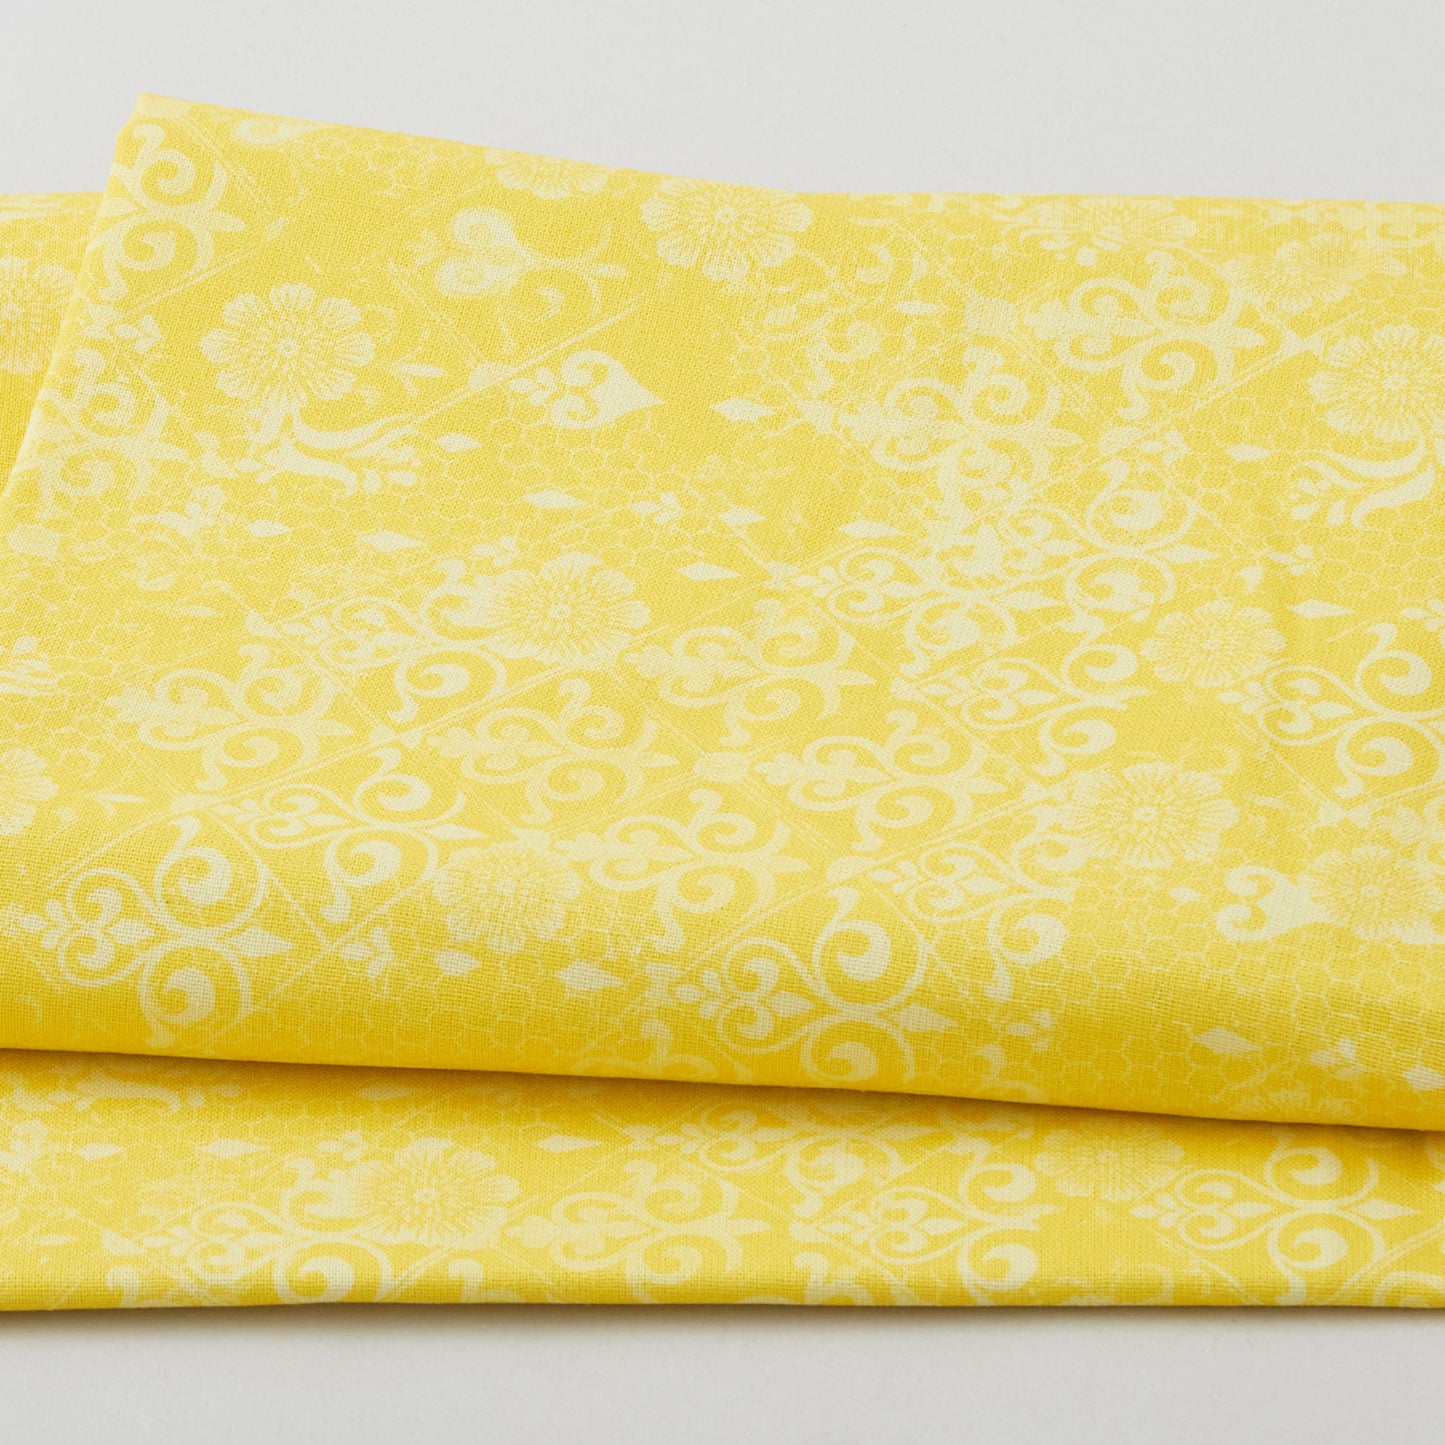 Mixed Medallion Blender - Yellow 2 Yard Cut Primary Image